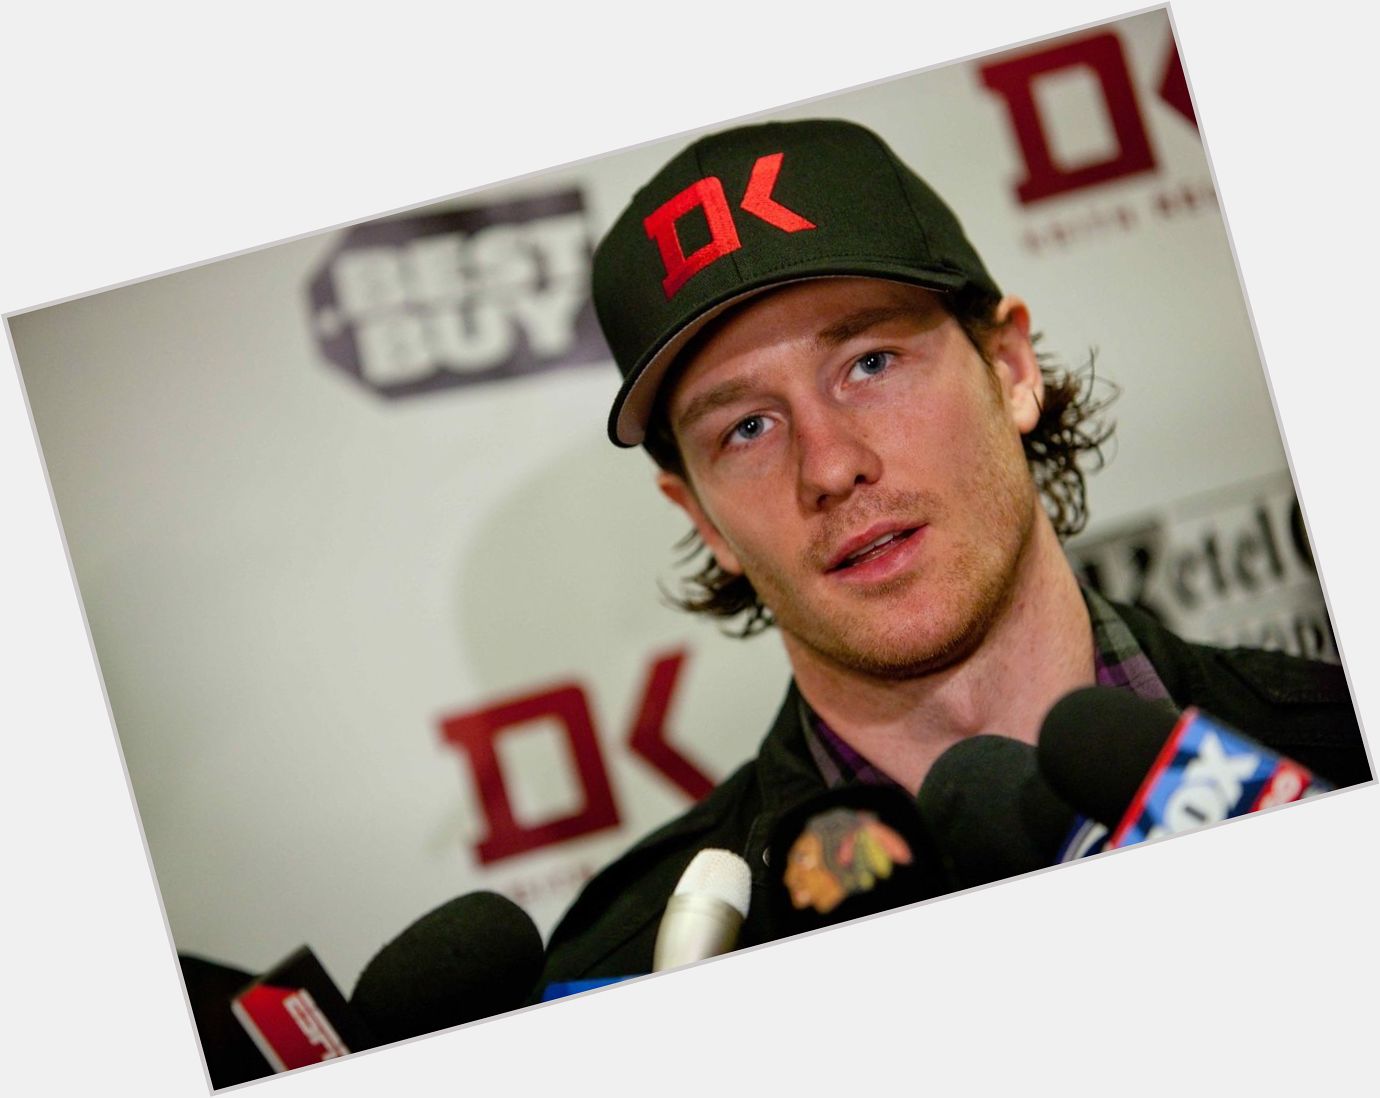 Https://fanpagepress.net/m/D/Duncan Keith Hairstyle 3